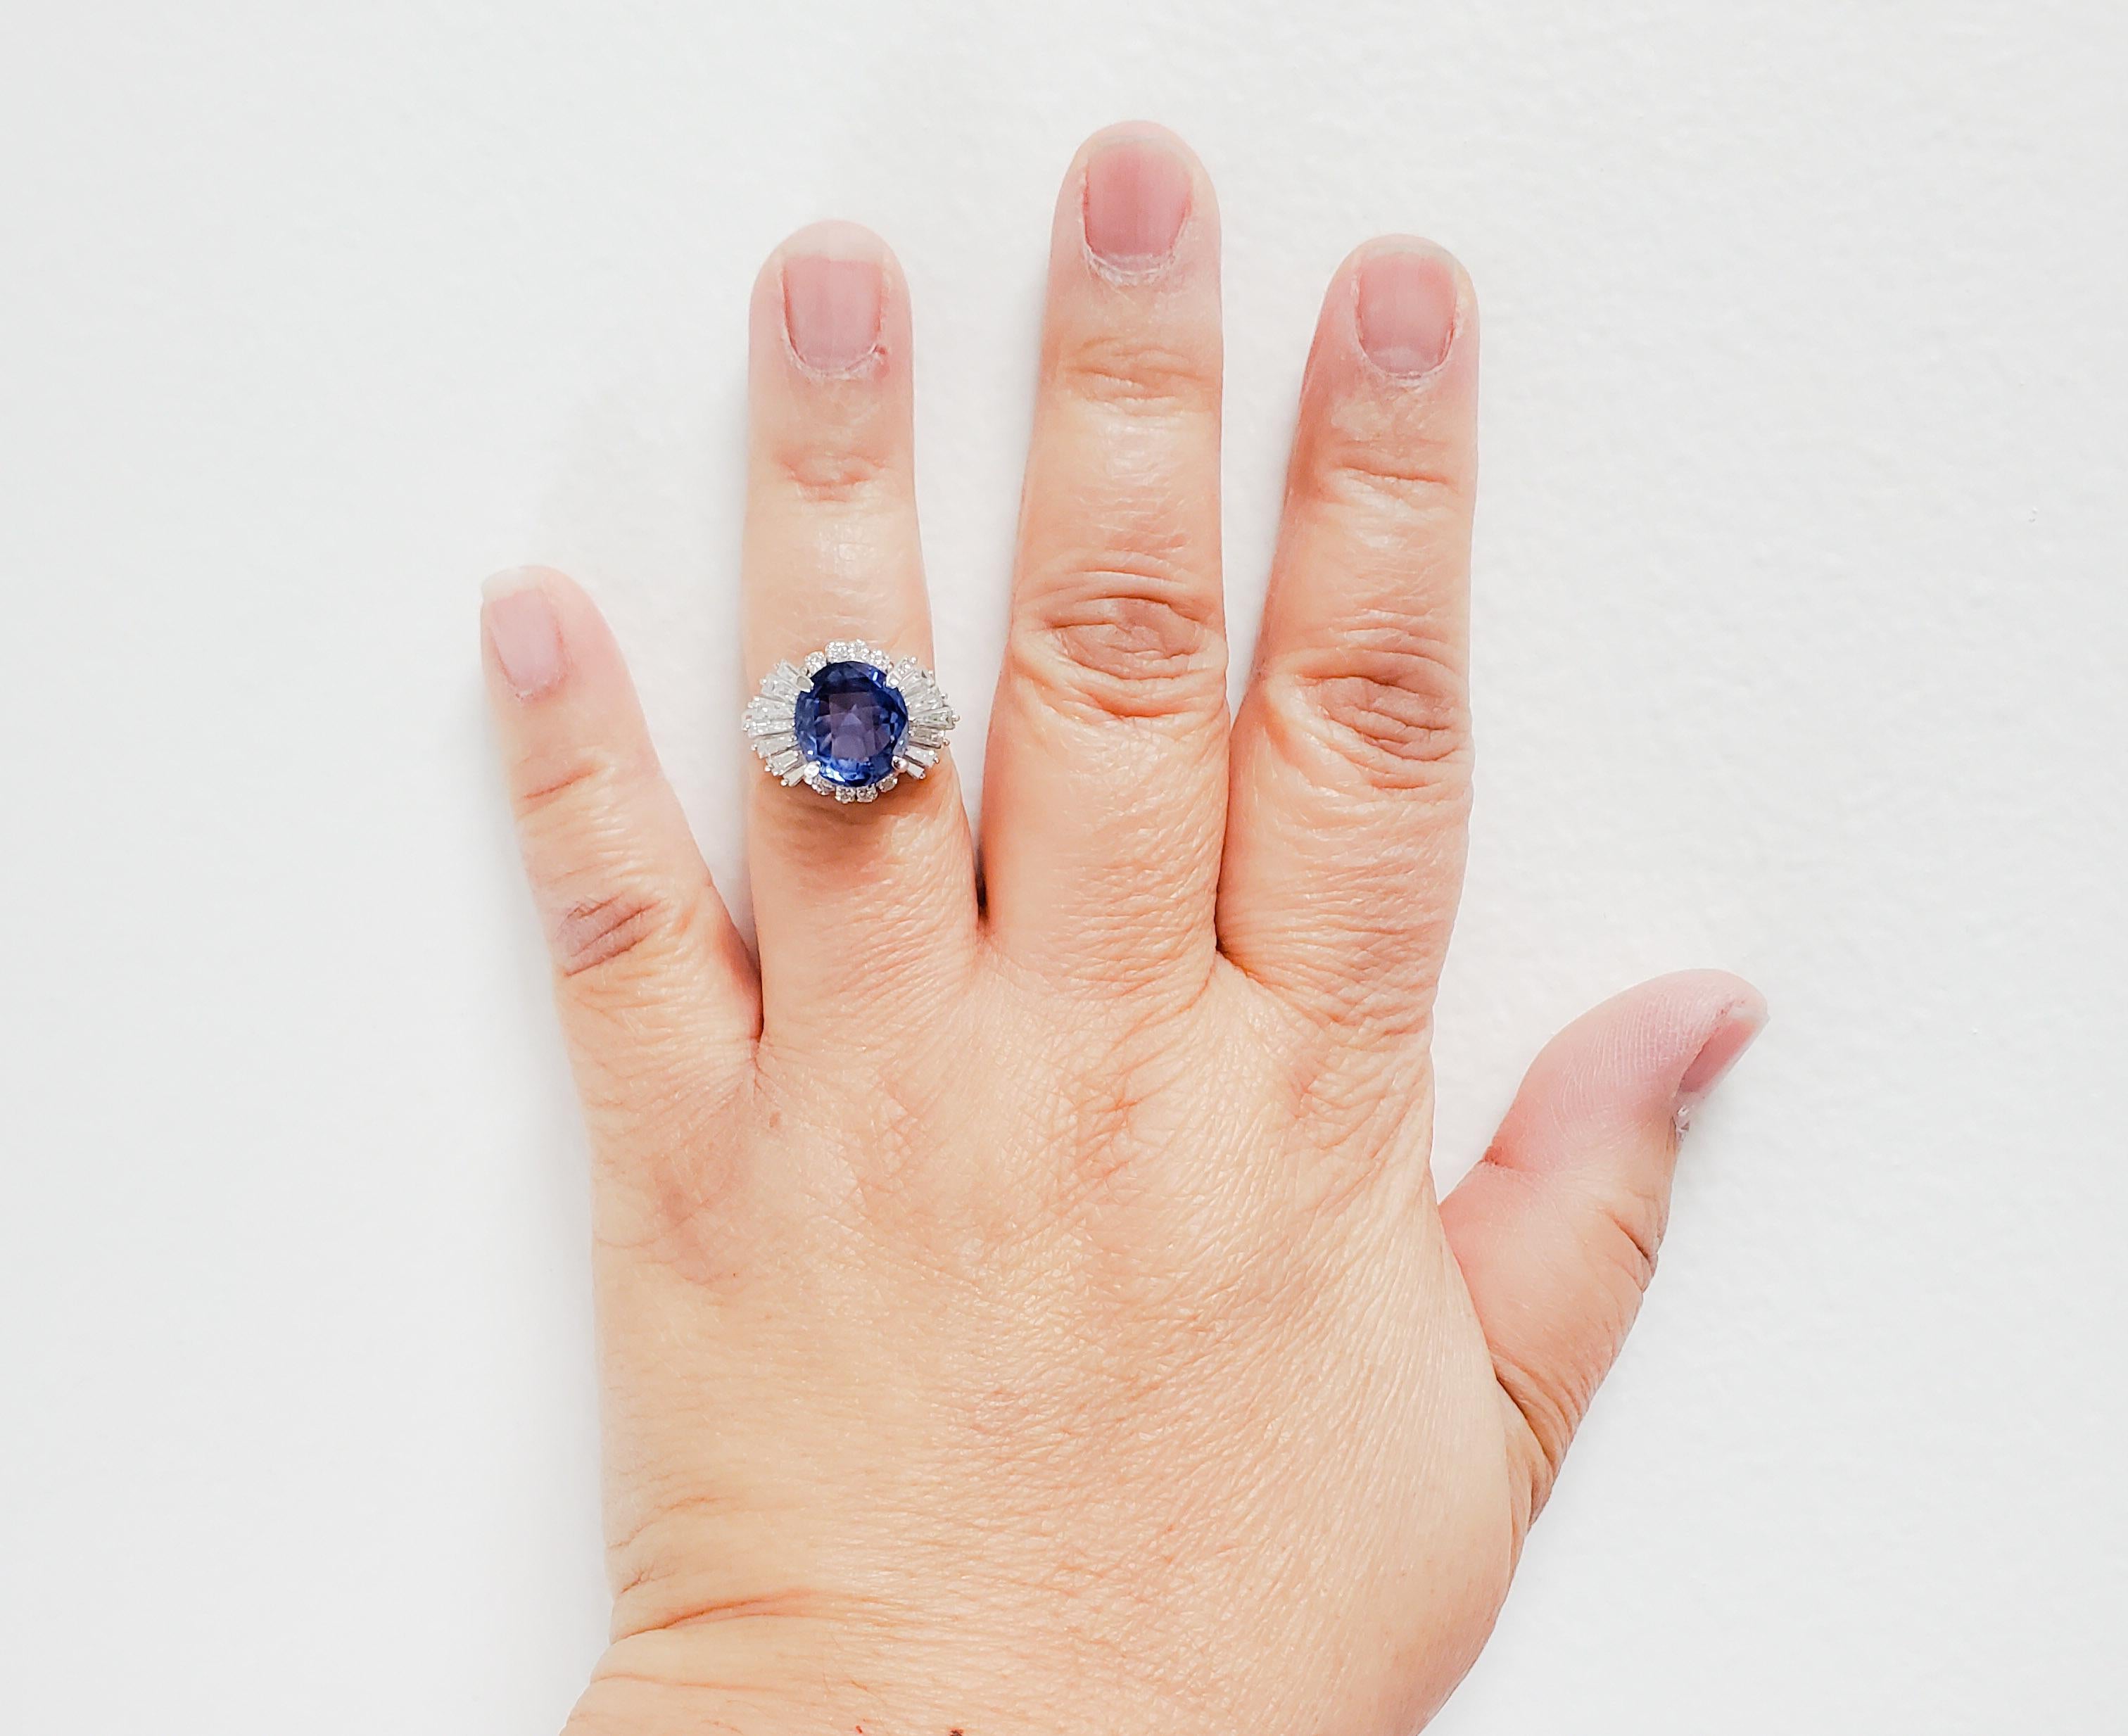 Gorgeous deep blue unheated blue sapphire oval weighing 5.53 ct. with 1.51 ct. of good quality white diamond rounds and baguettes.  Handmade platinum mounting in size 7.  GIA certificate is included.